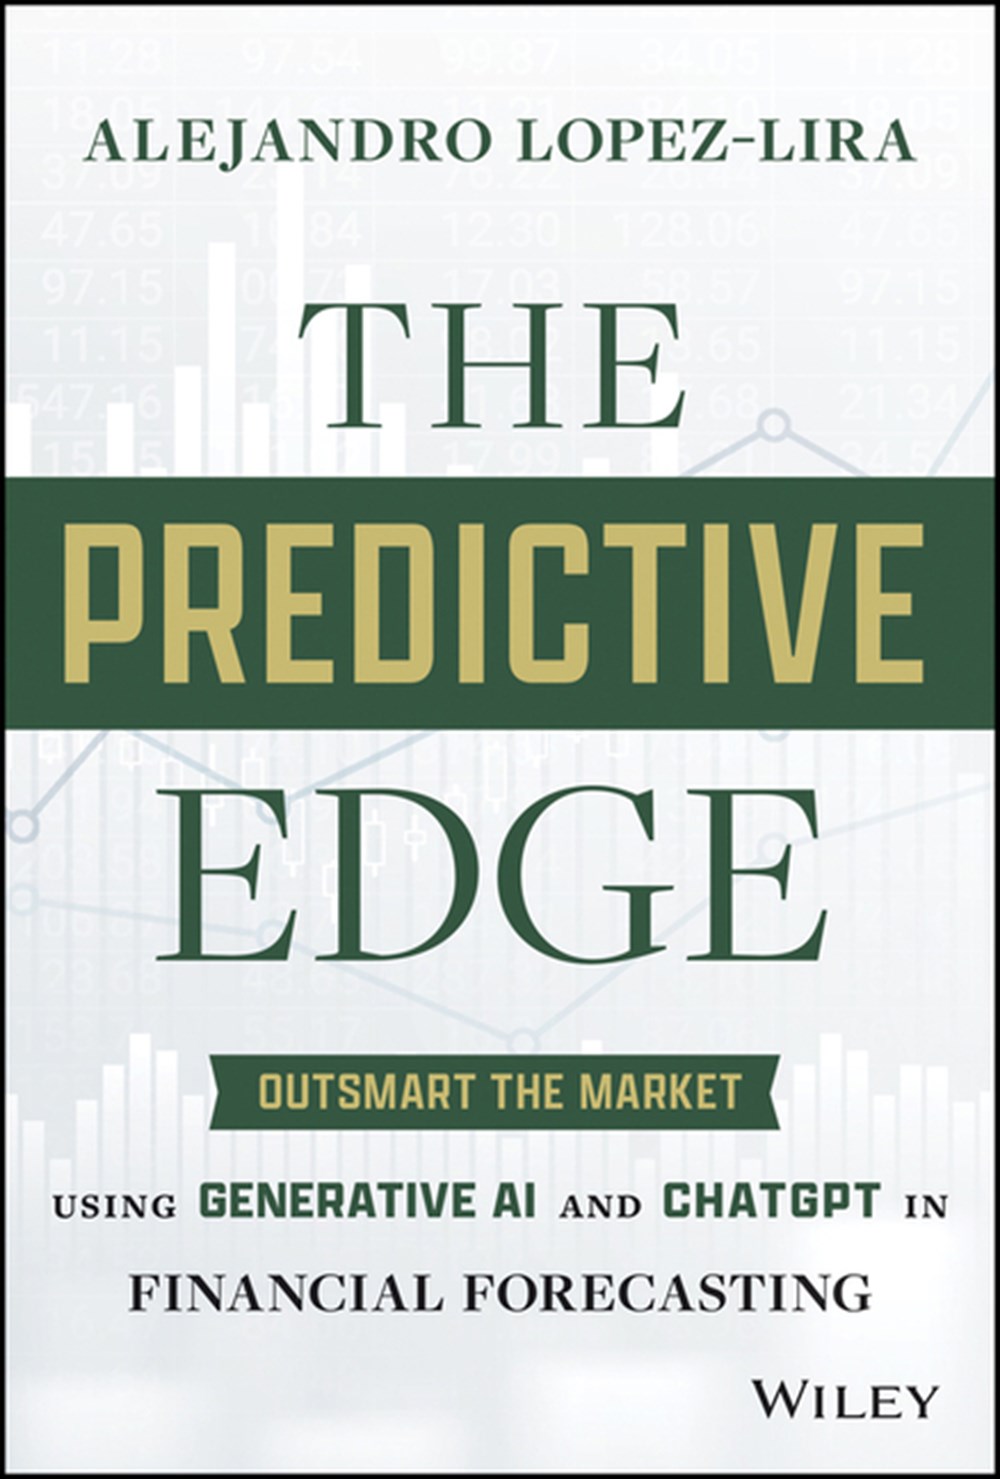 Predictive Edge: Outsmart the Market Using Generative AI and ChatGPT in Financial Forecasting